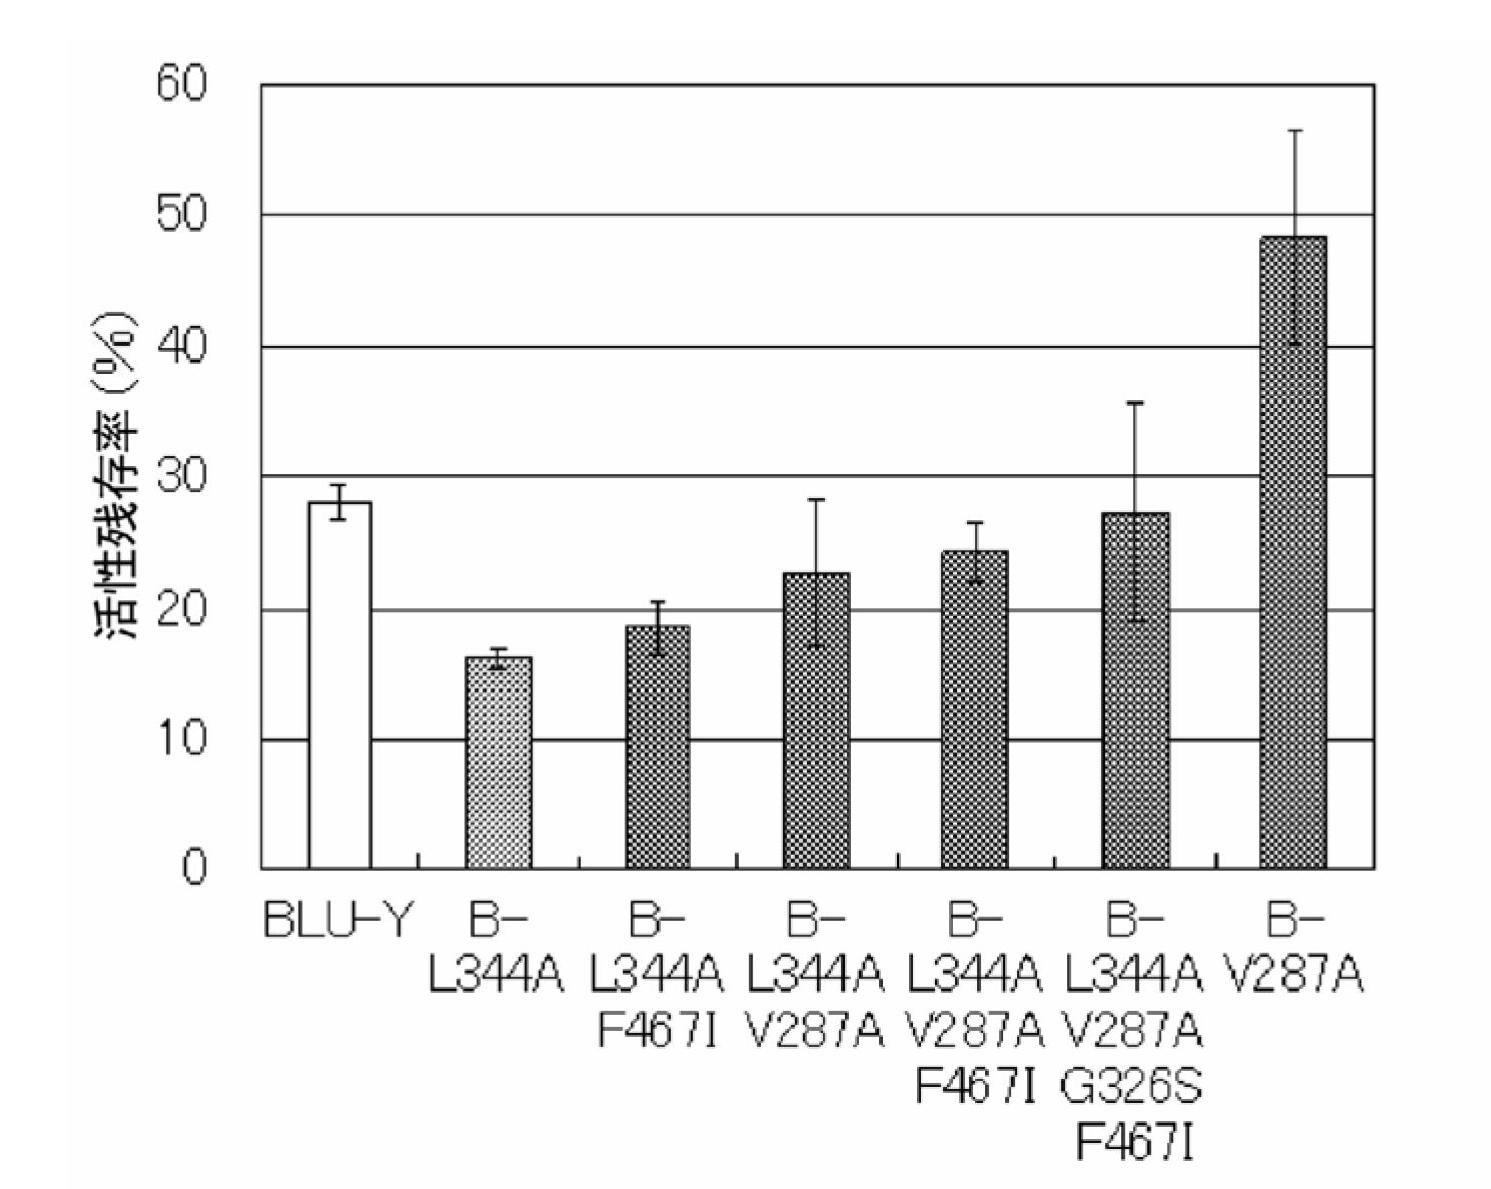 Firefly luciferase and gene thereof, and process for production of firefly luciferase